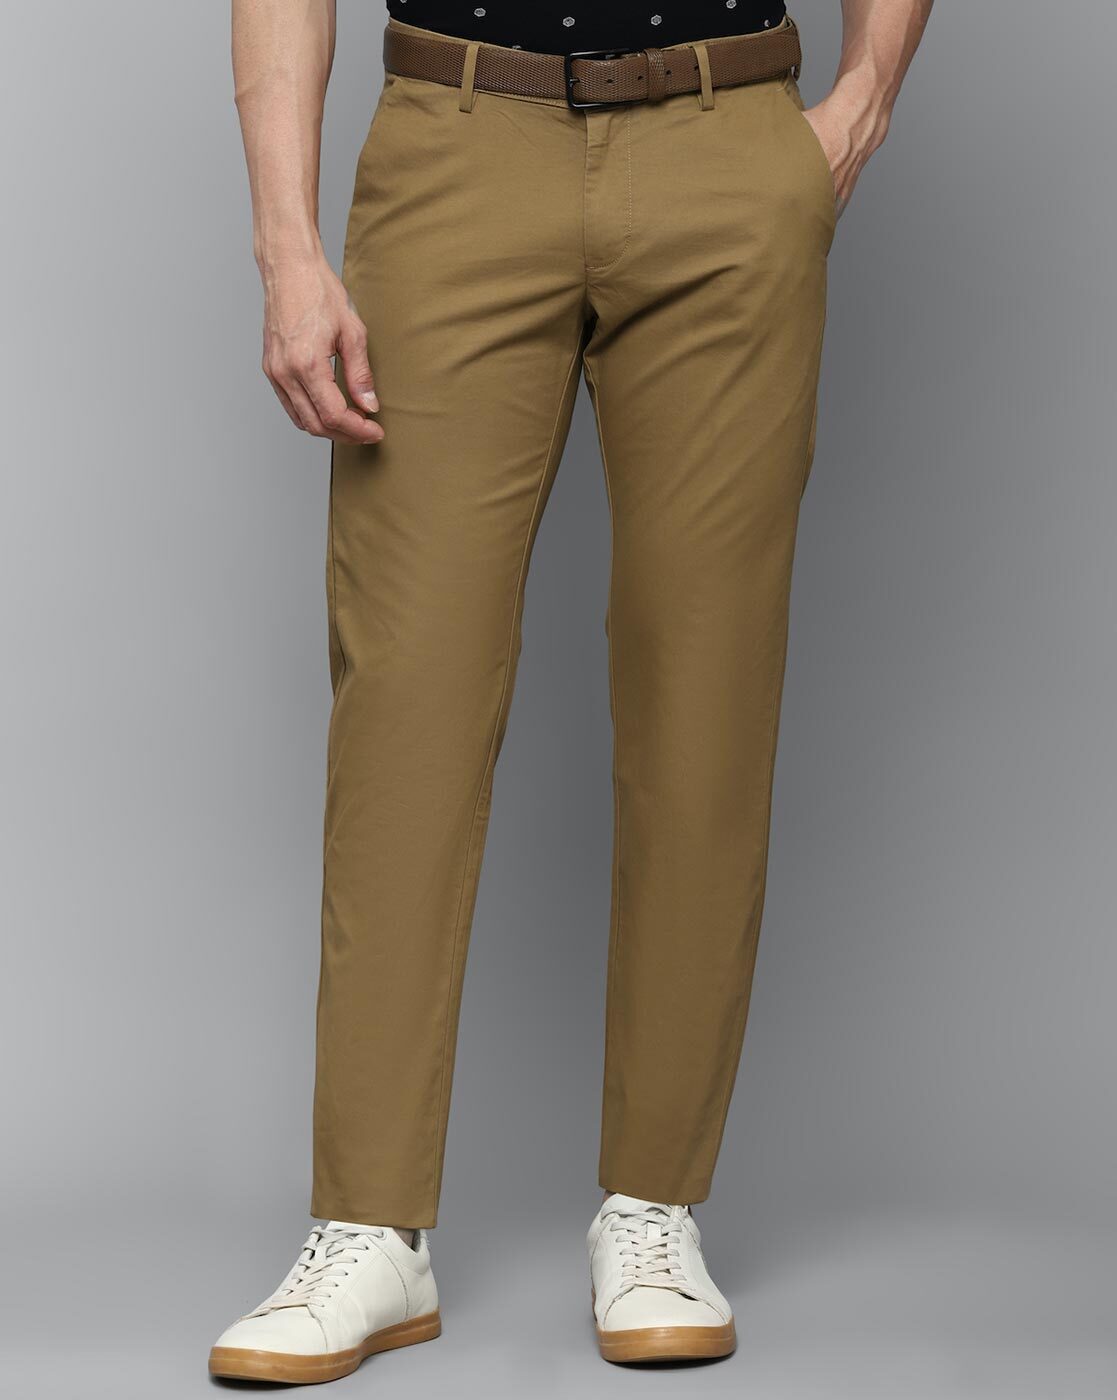 Buy Allen Solly Men Brown Solid Slim fit Regular trousers Online at Low  Prices in India - Paytmmall.com